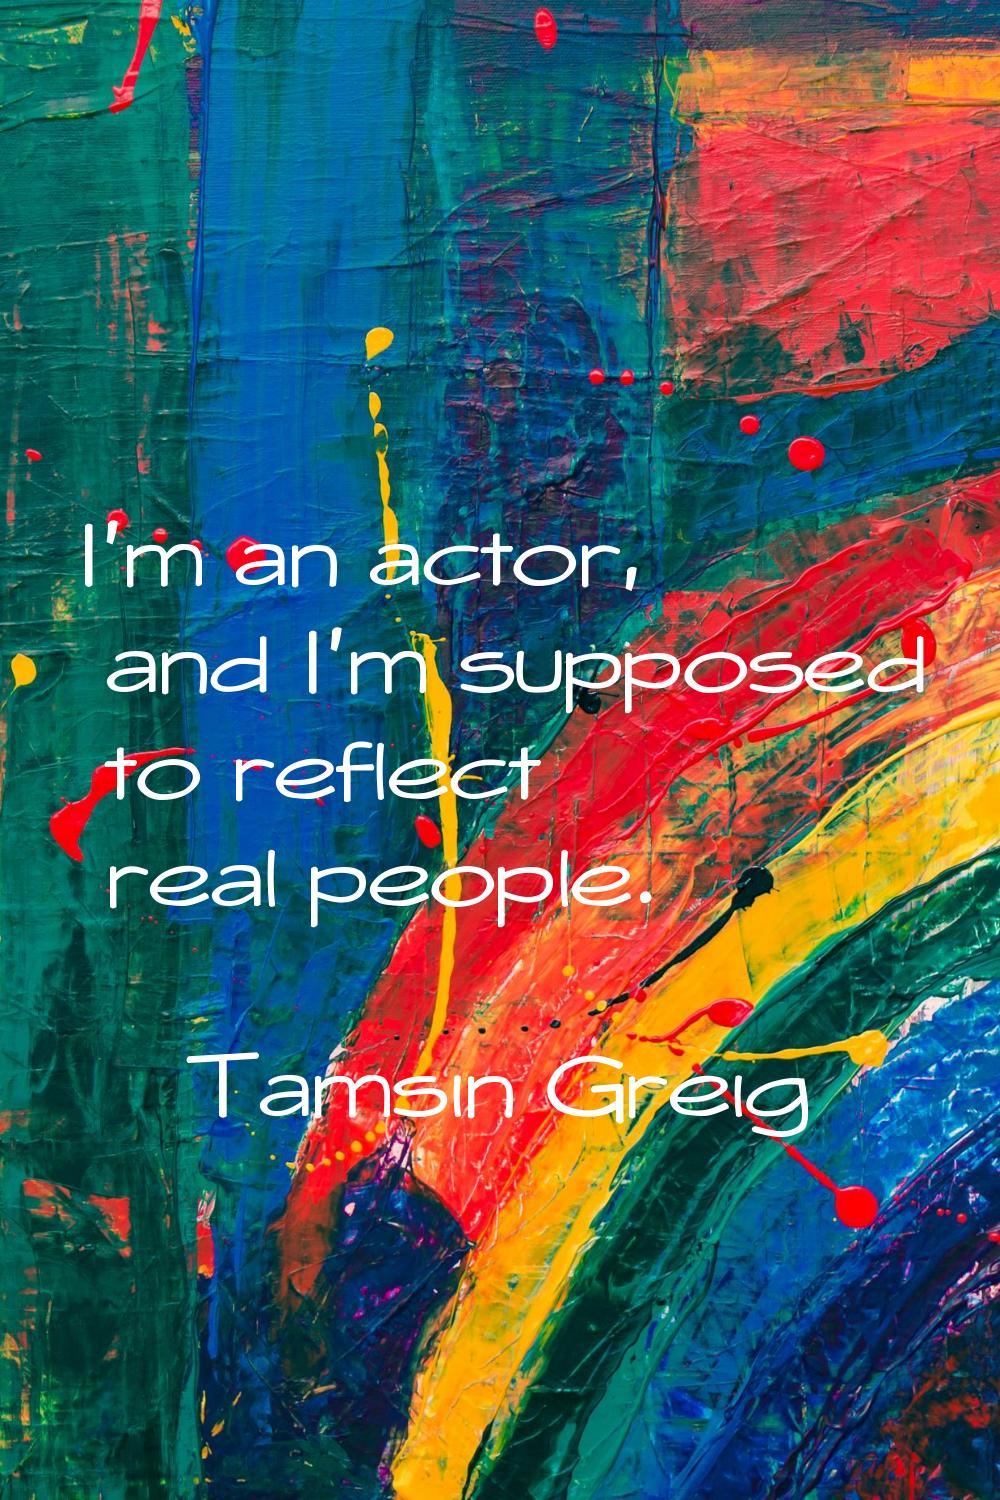 I'm an actor, and I'm supposed to reflect real people.